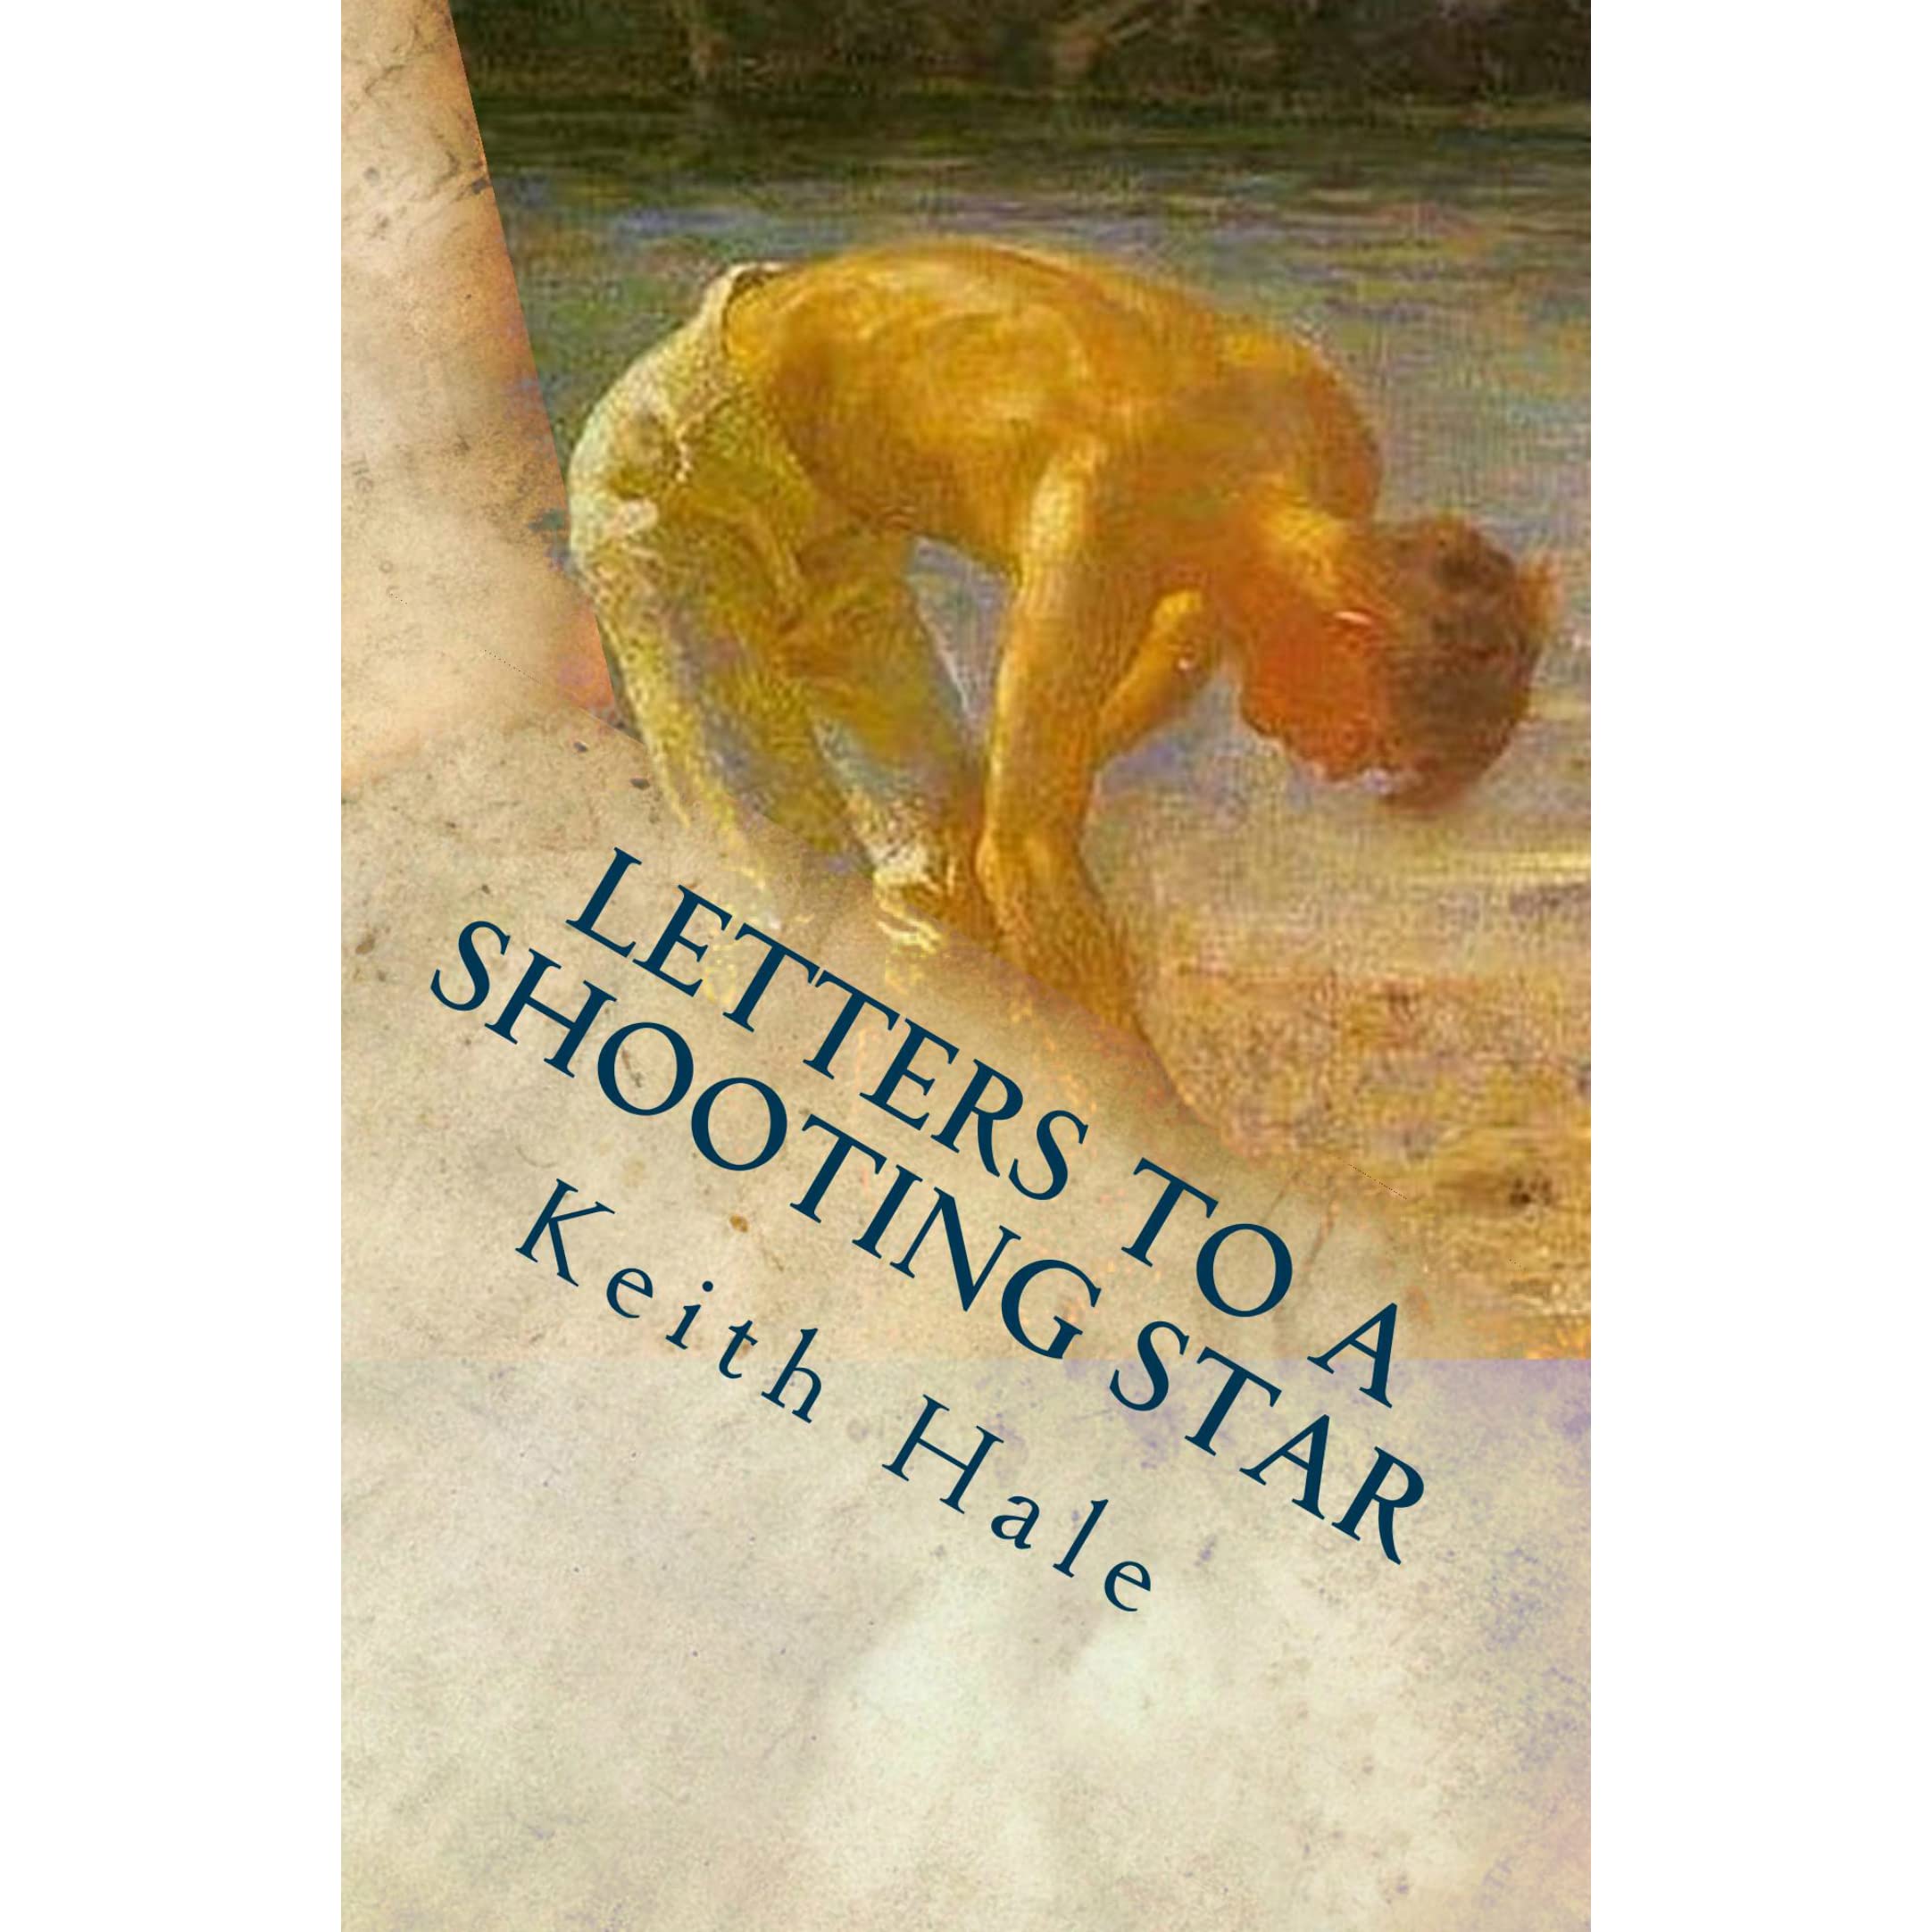 Letters to a Shooting Star